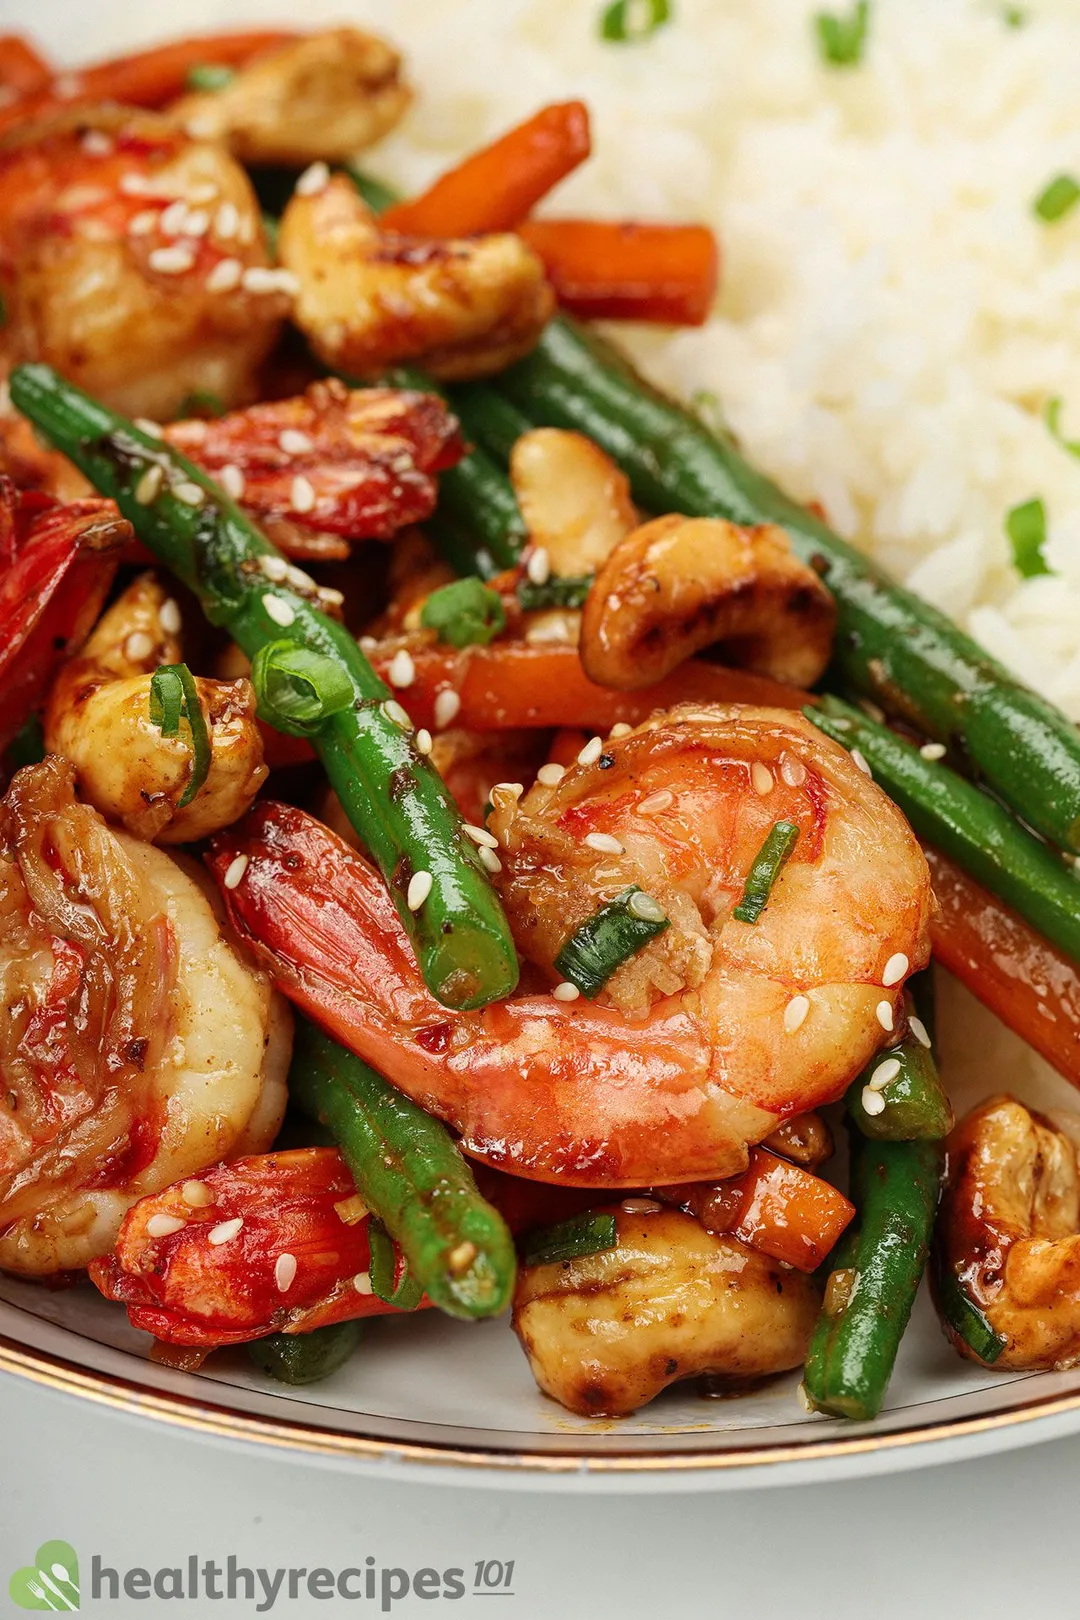 And So Is Our Cashew Shrimp Recipe.